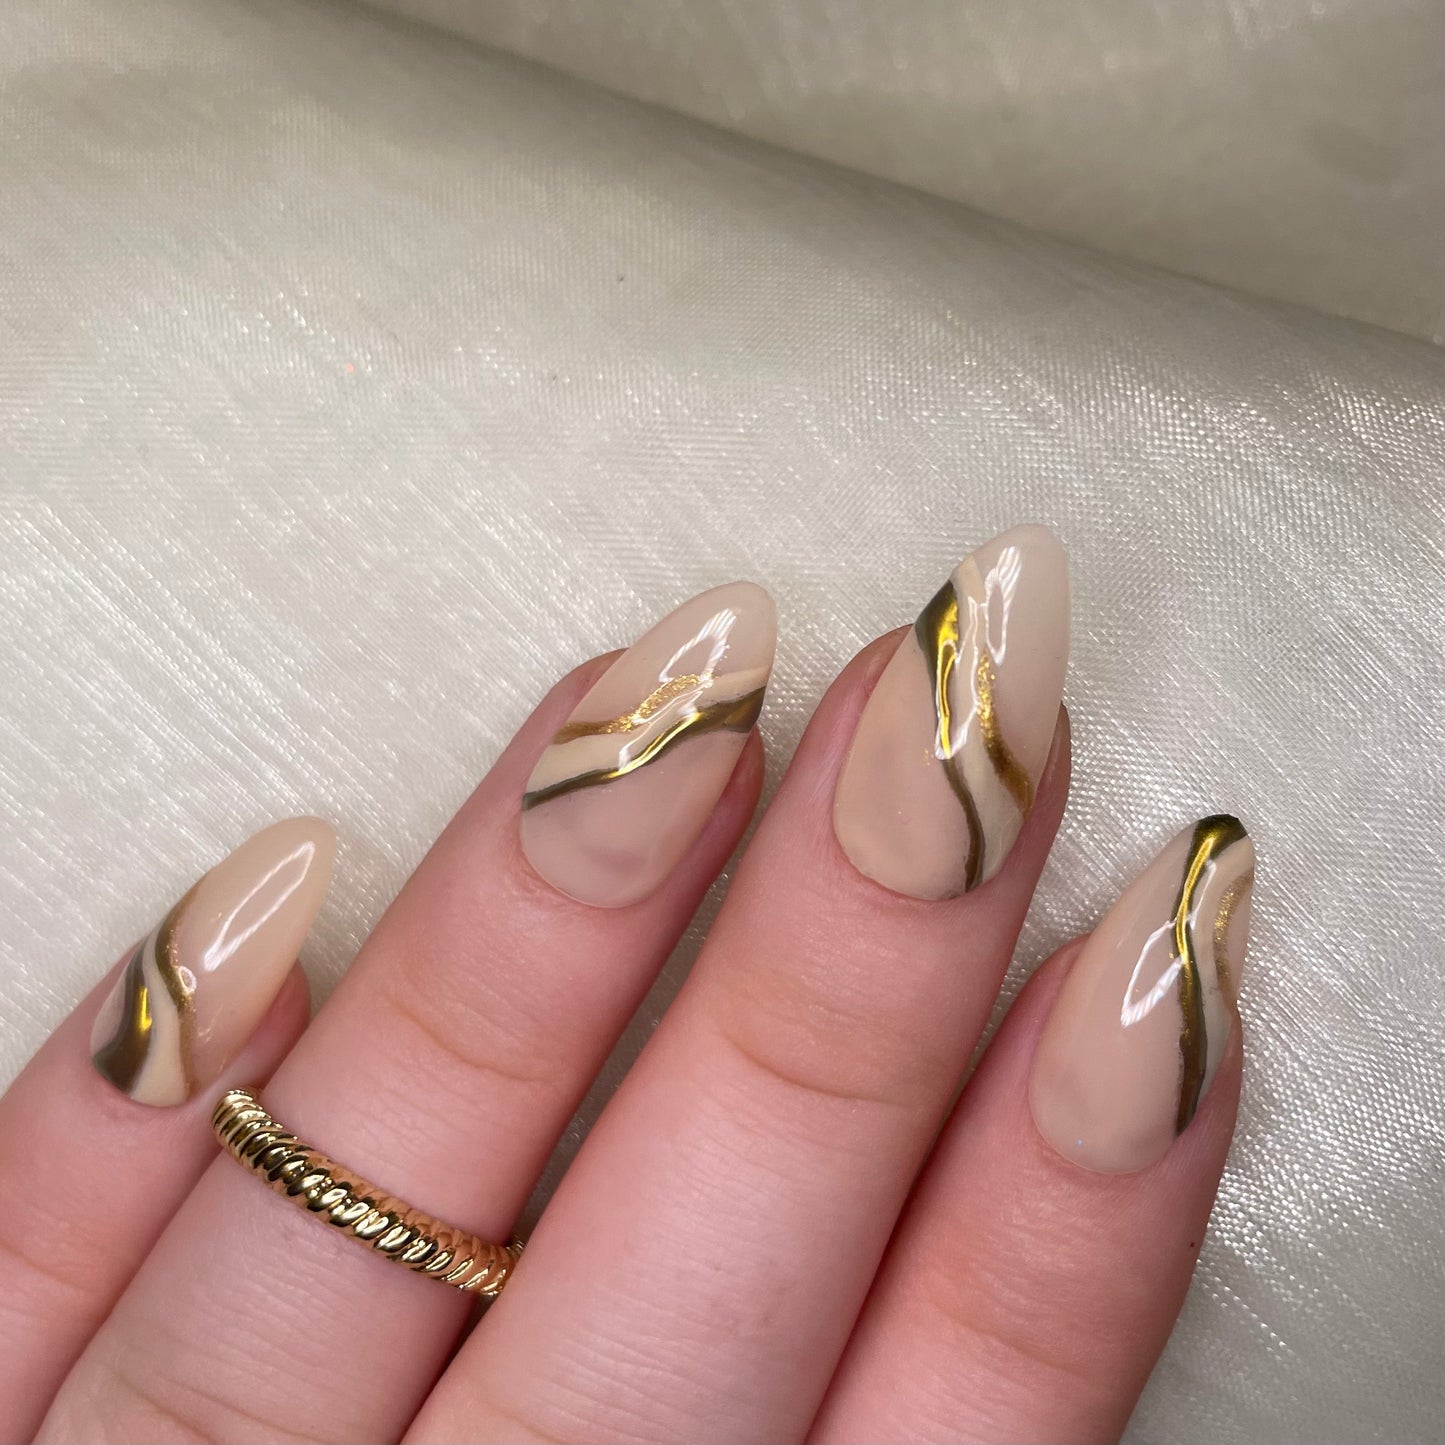 Sheer Nude and Gold Chrome Almonds